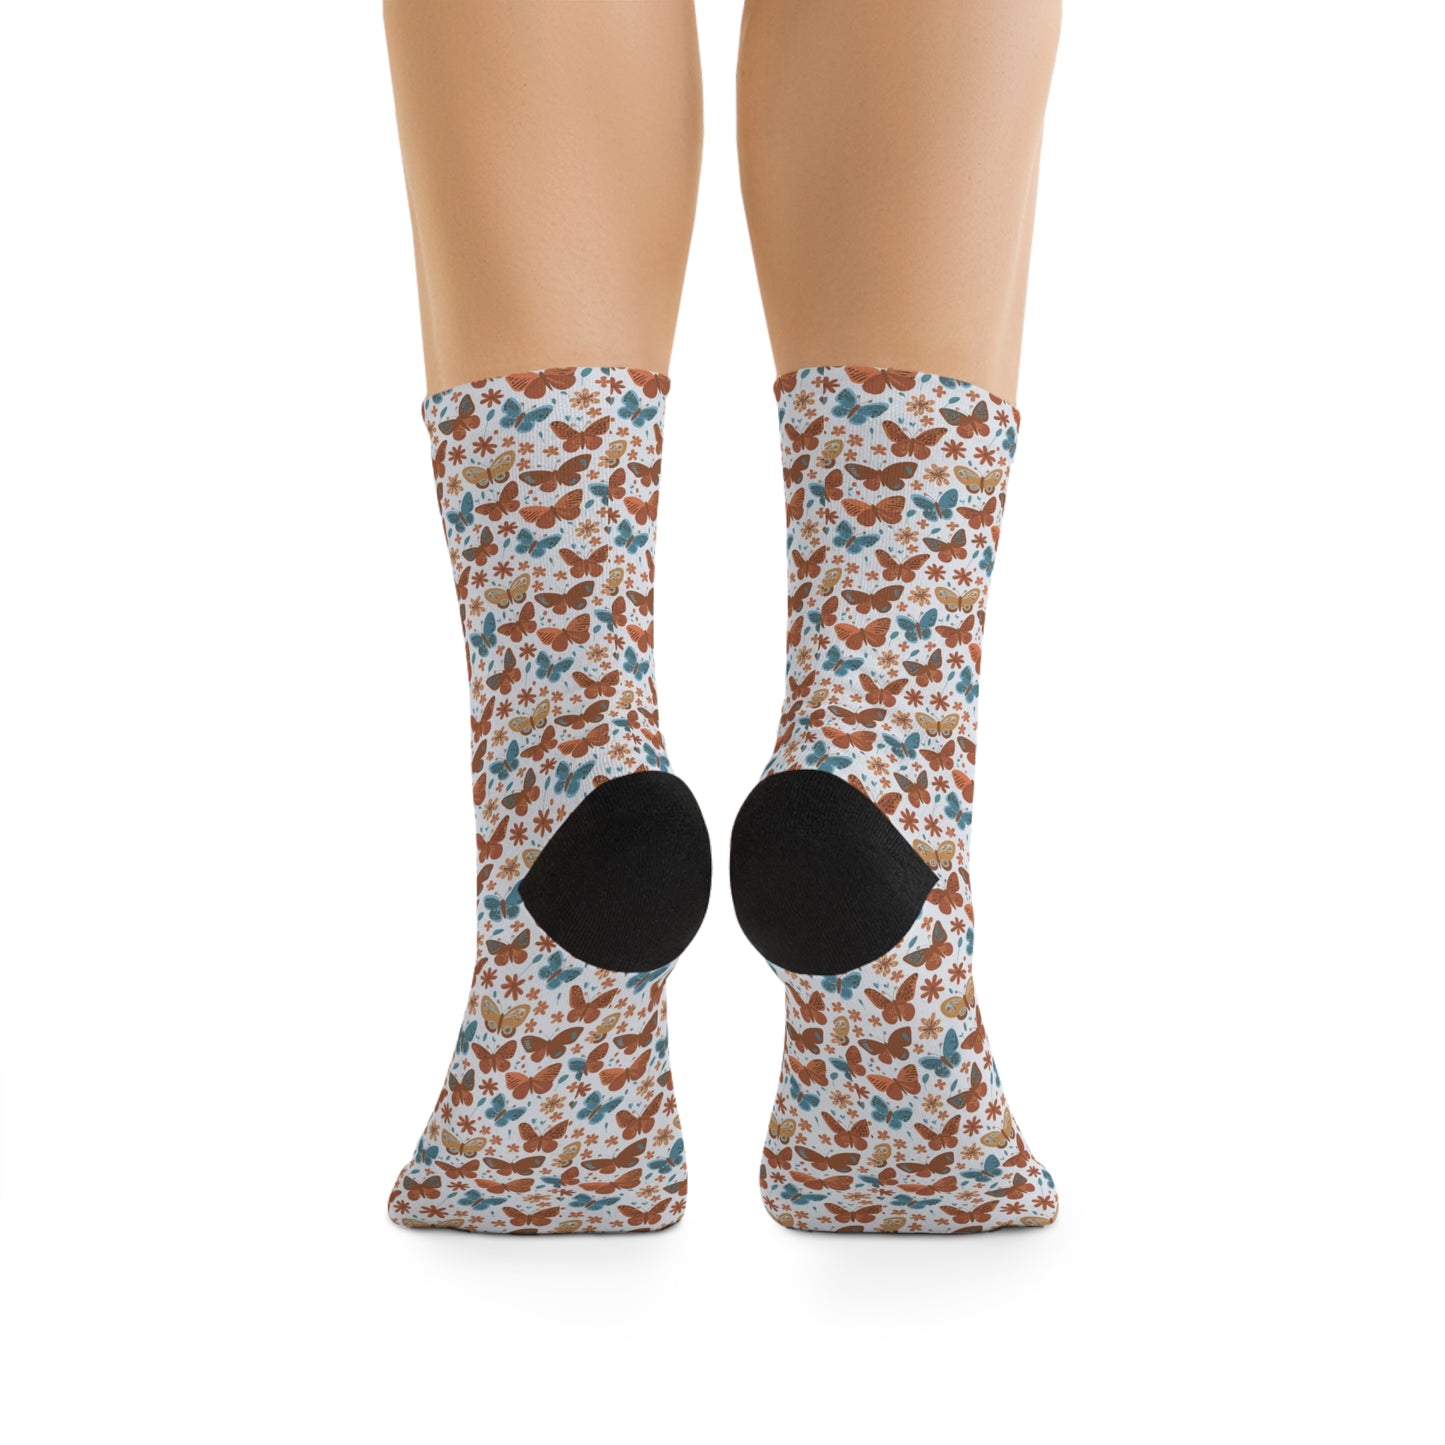 Unisex Crew Socks with Butterfly and Flower Pattern - Eco-Friendly and Comfortable